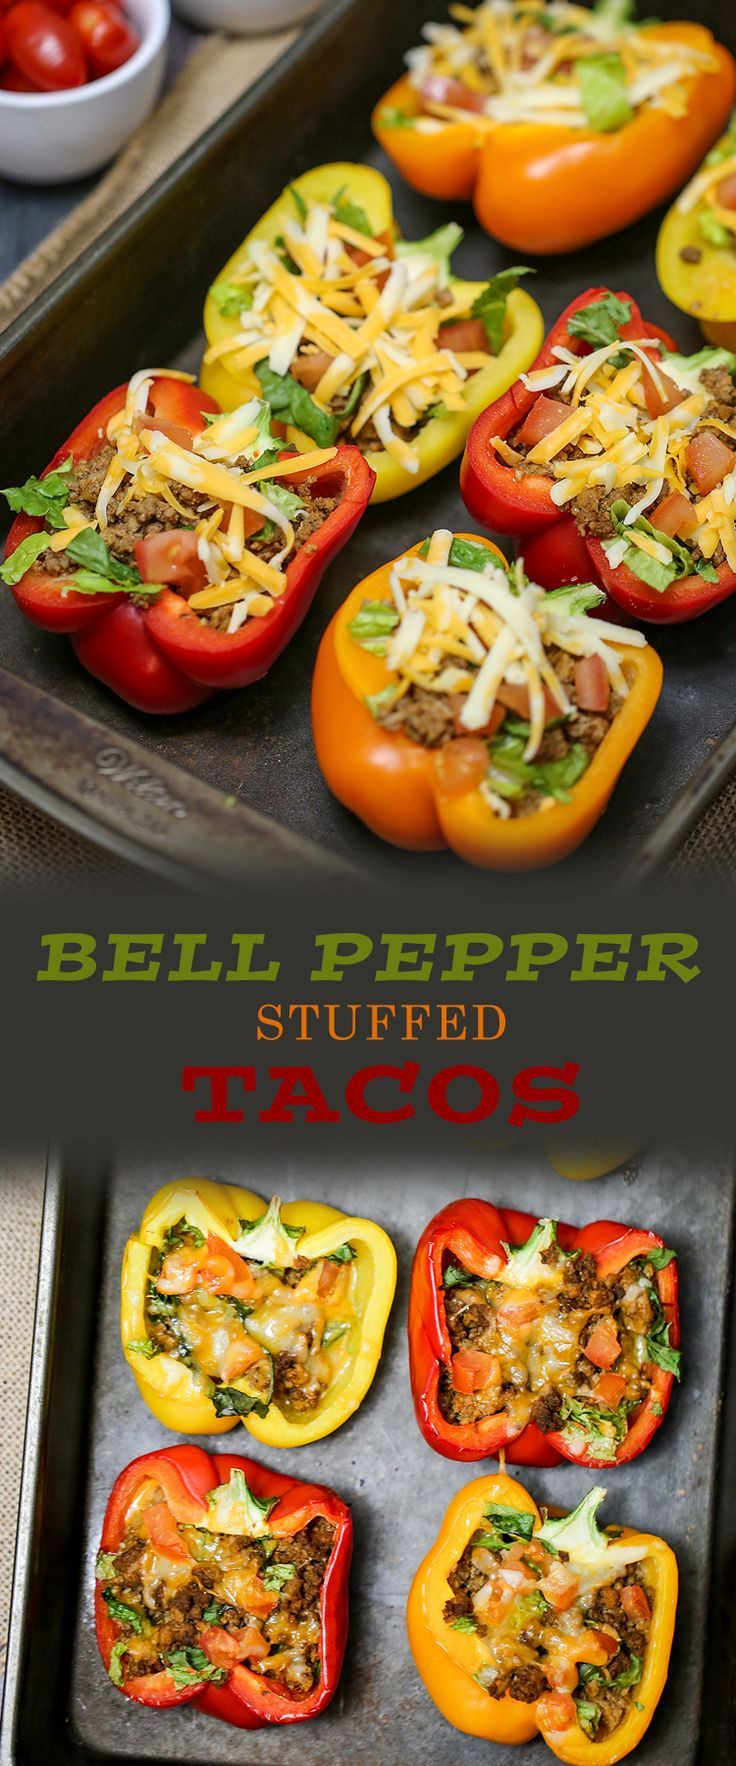 Low Calorie Stuffed Bell Peppers
 Bell Pepper Stuffed Tacos Recipe Yummy Recipes